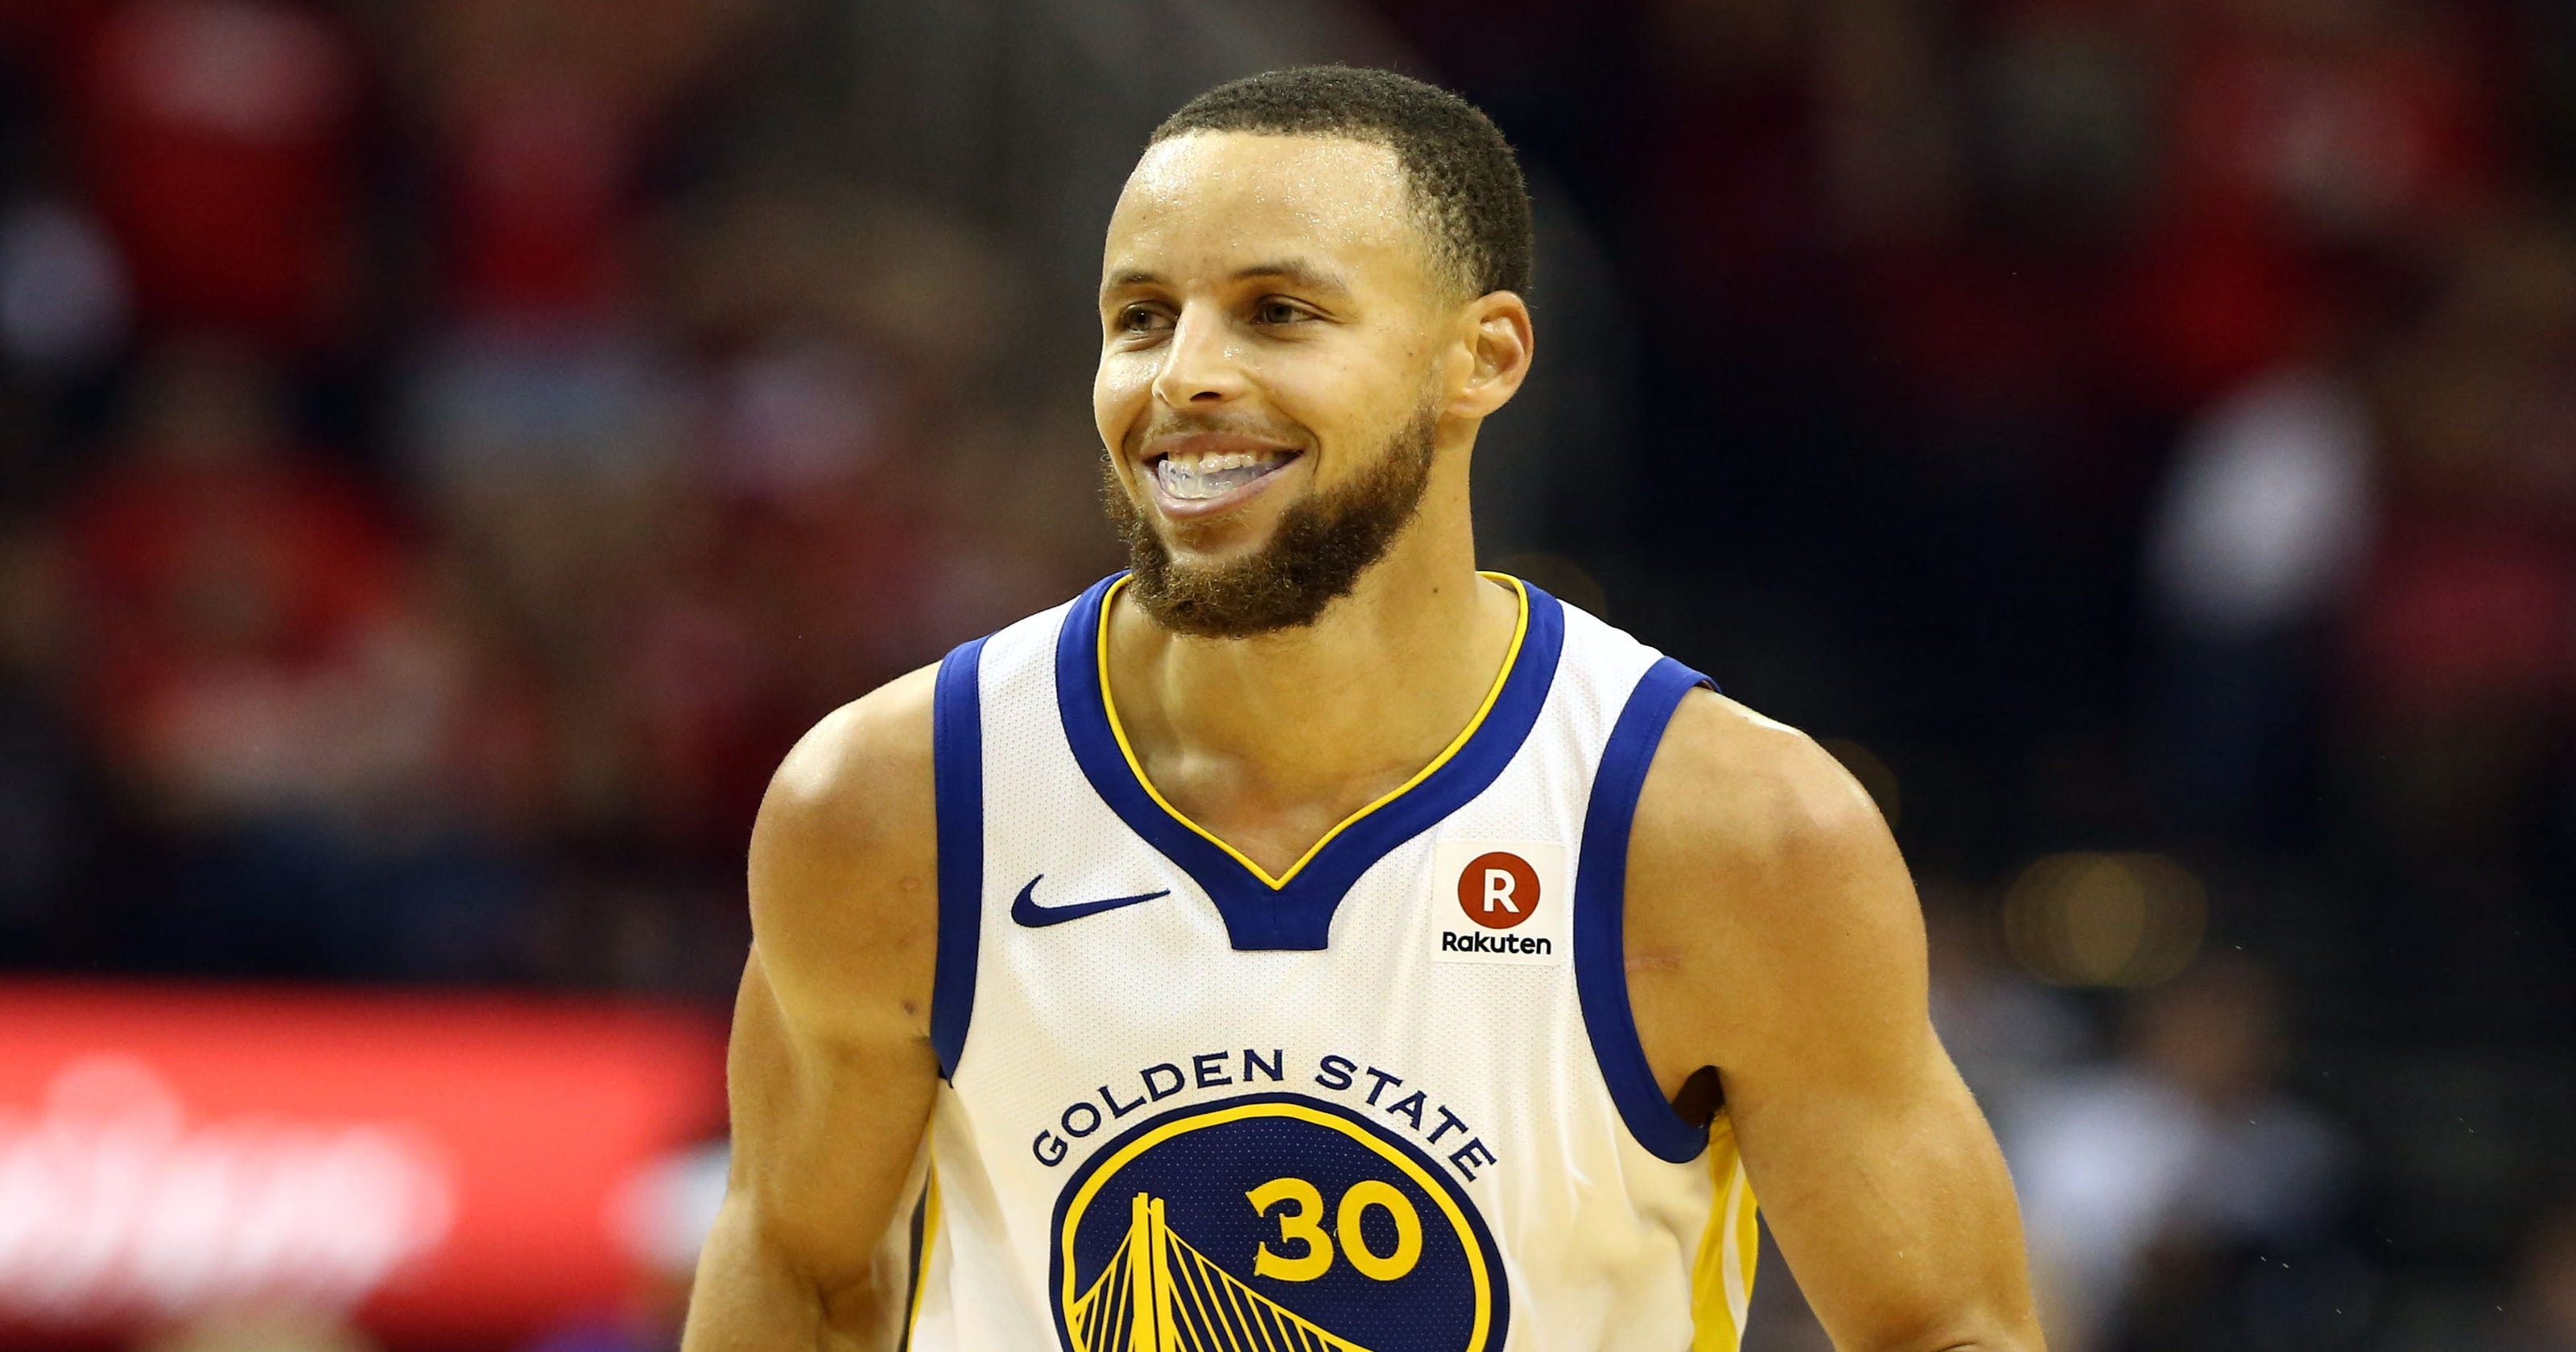 Steph Curry is having a blast singing and dunking at golf tourney